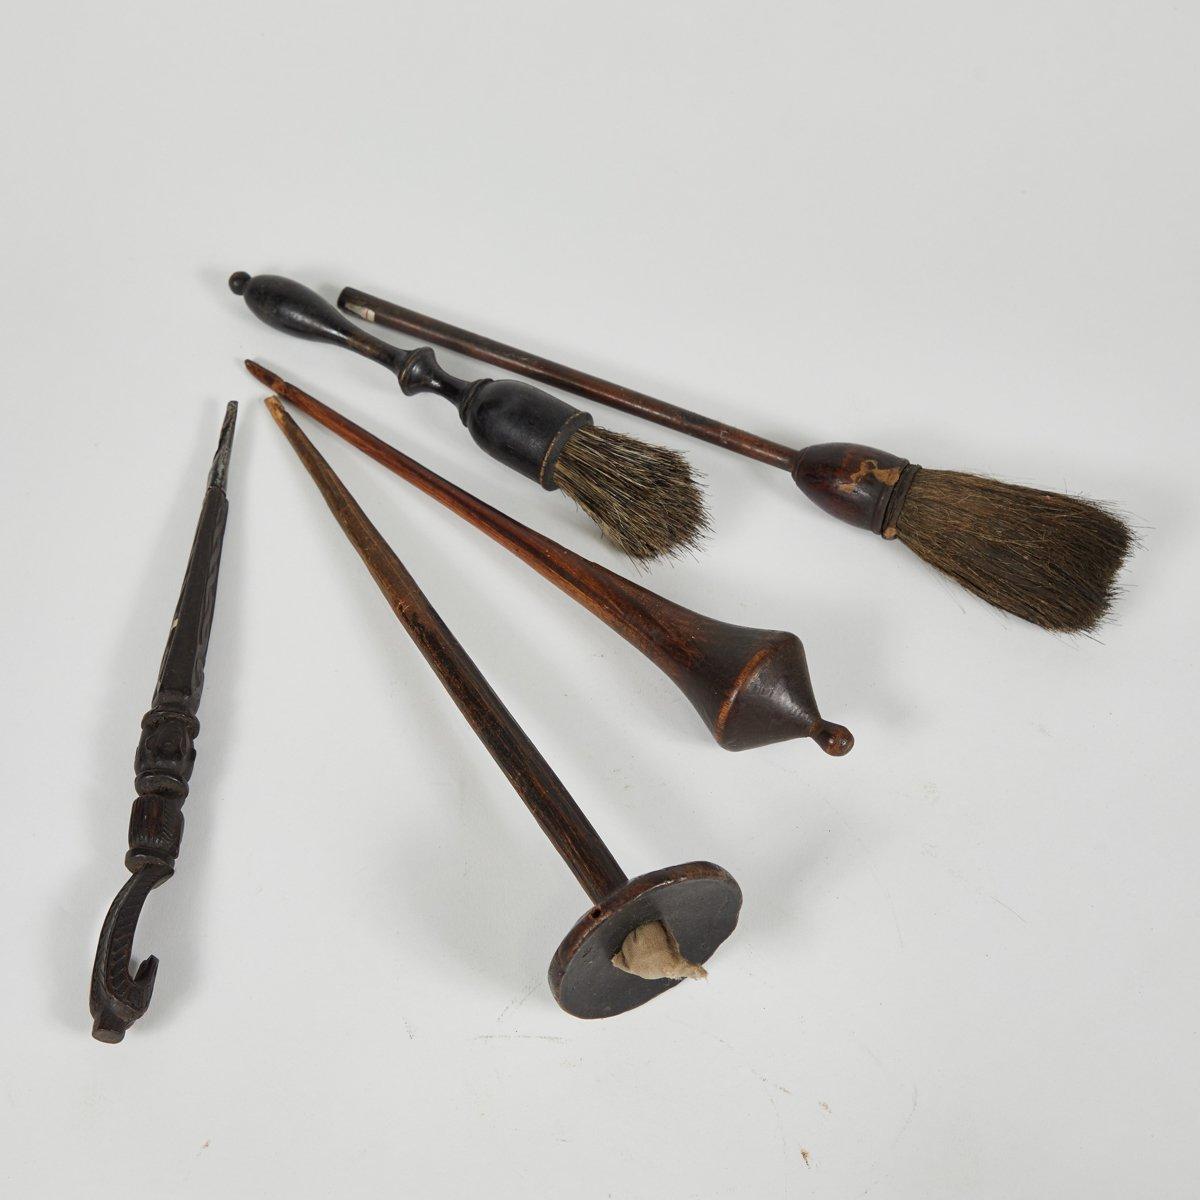 Ten tattoo pens and wood fibre-tipped brushes from late 19th-century Belgium. An organic decorative accent with an edgy, artistic history. 

Belgium, circa 1880

Dimensions: 2W x 2D x 13H